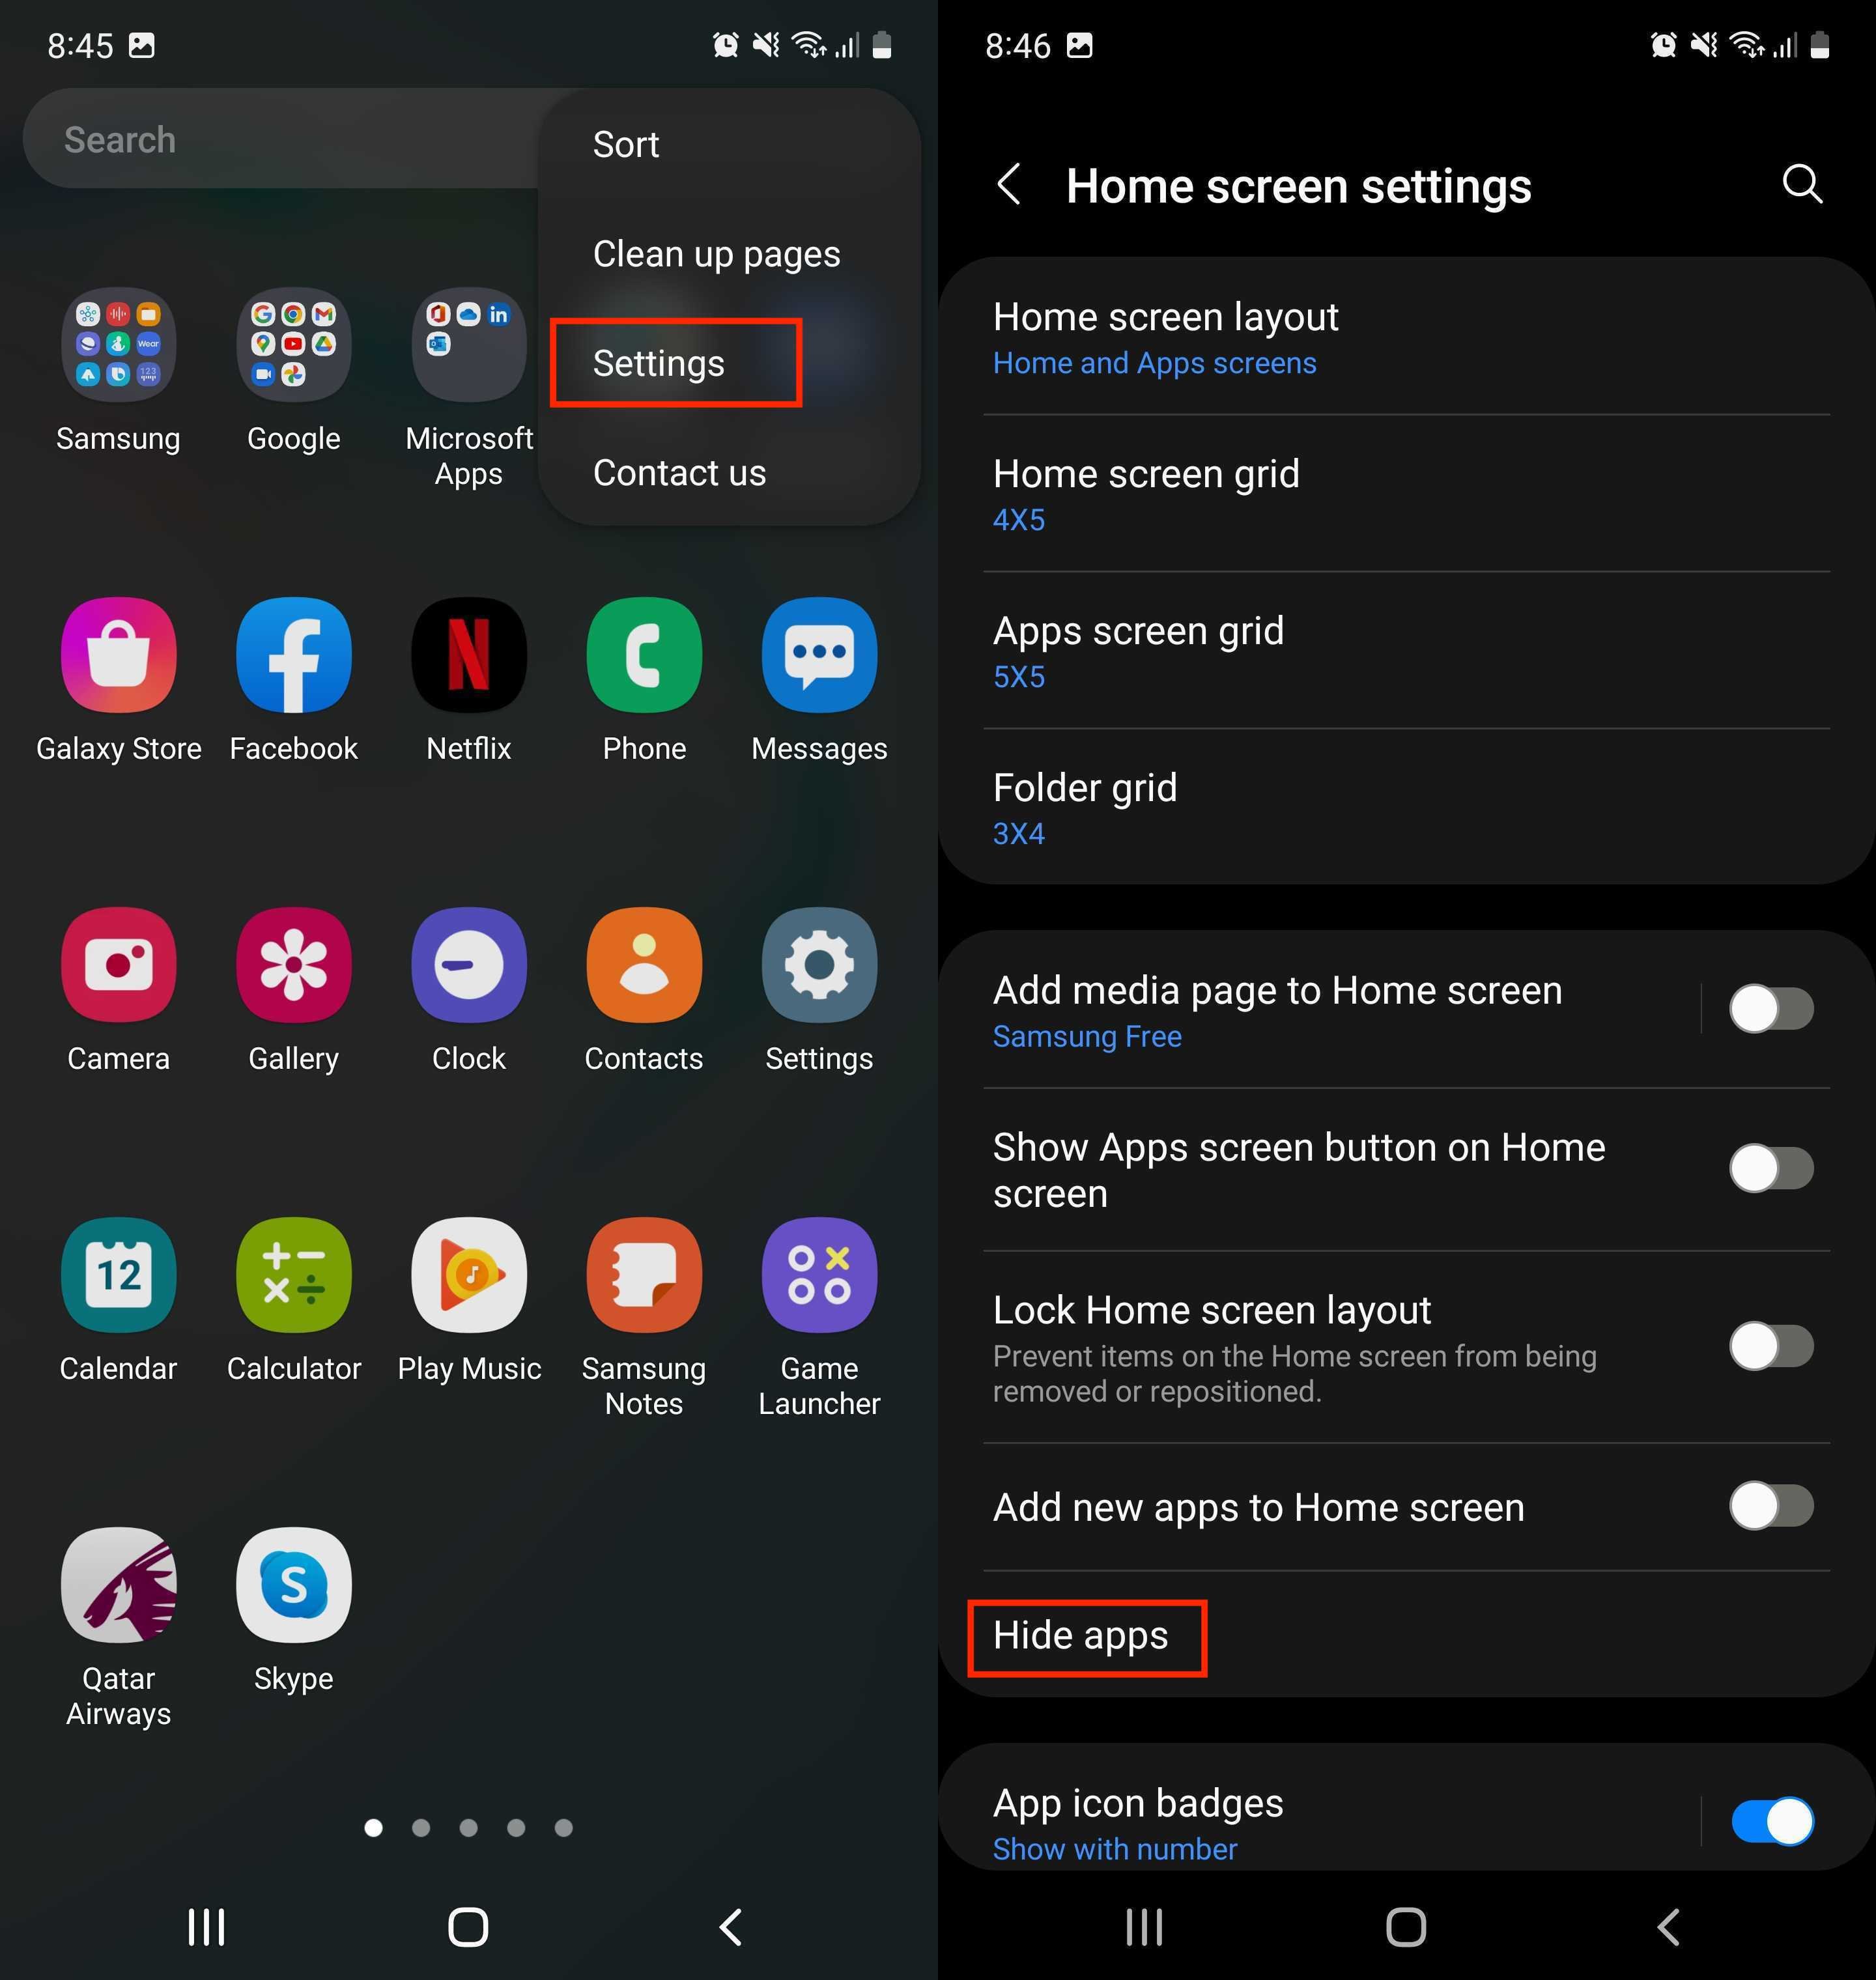 SECRET TRICK How to Hide Apps and Games in Android